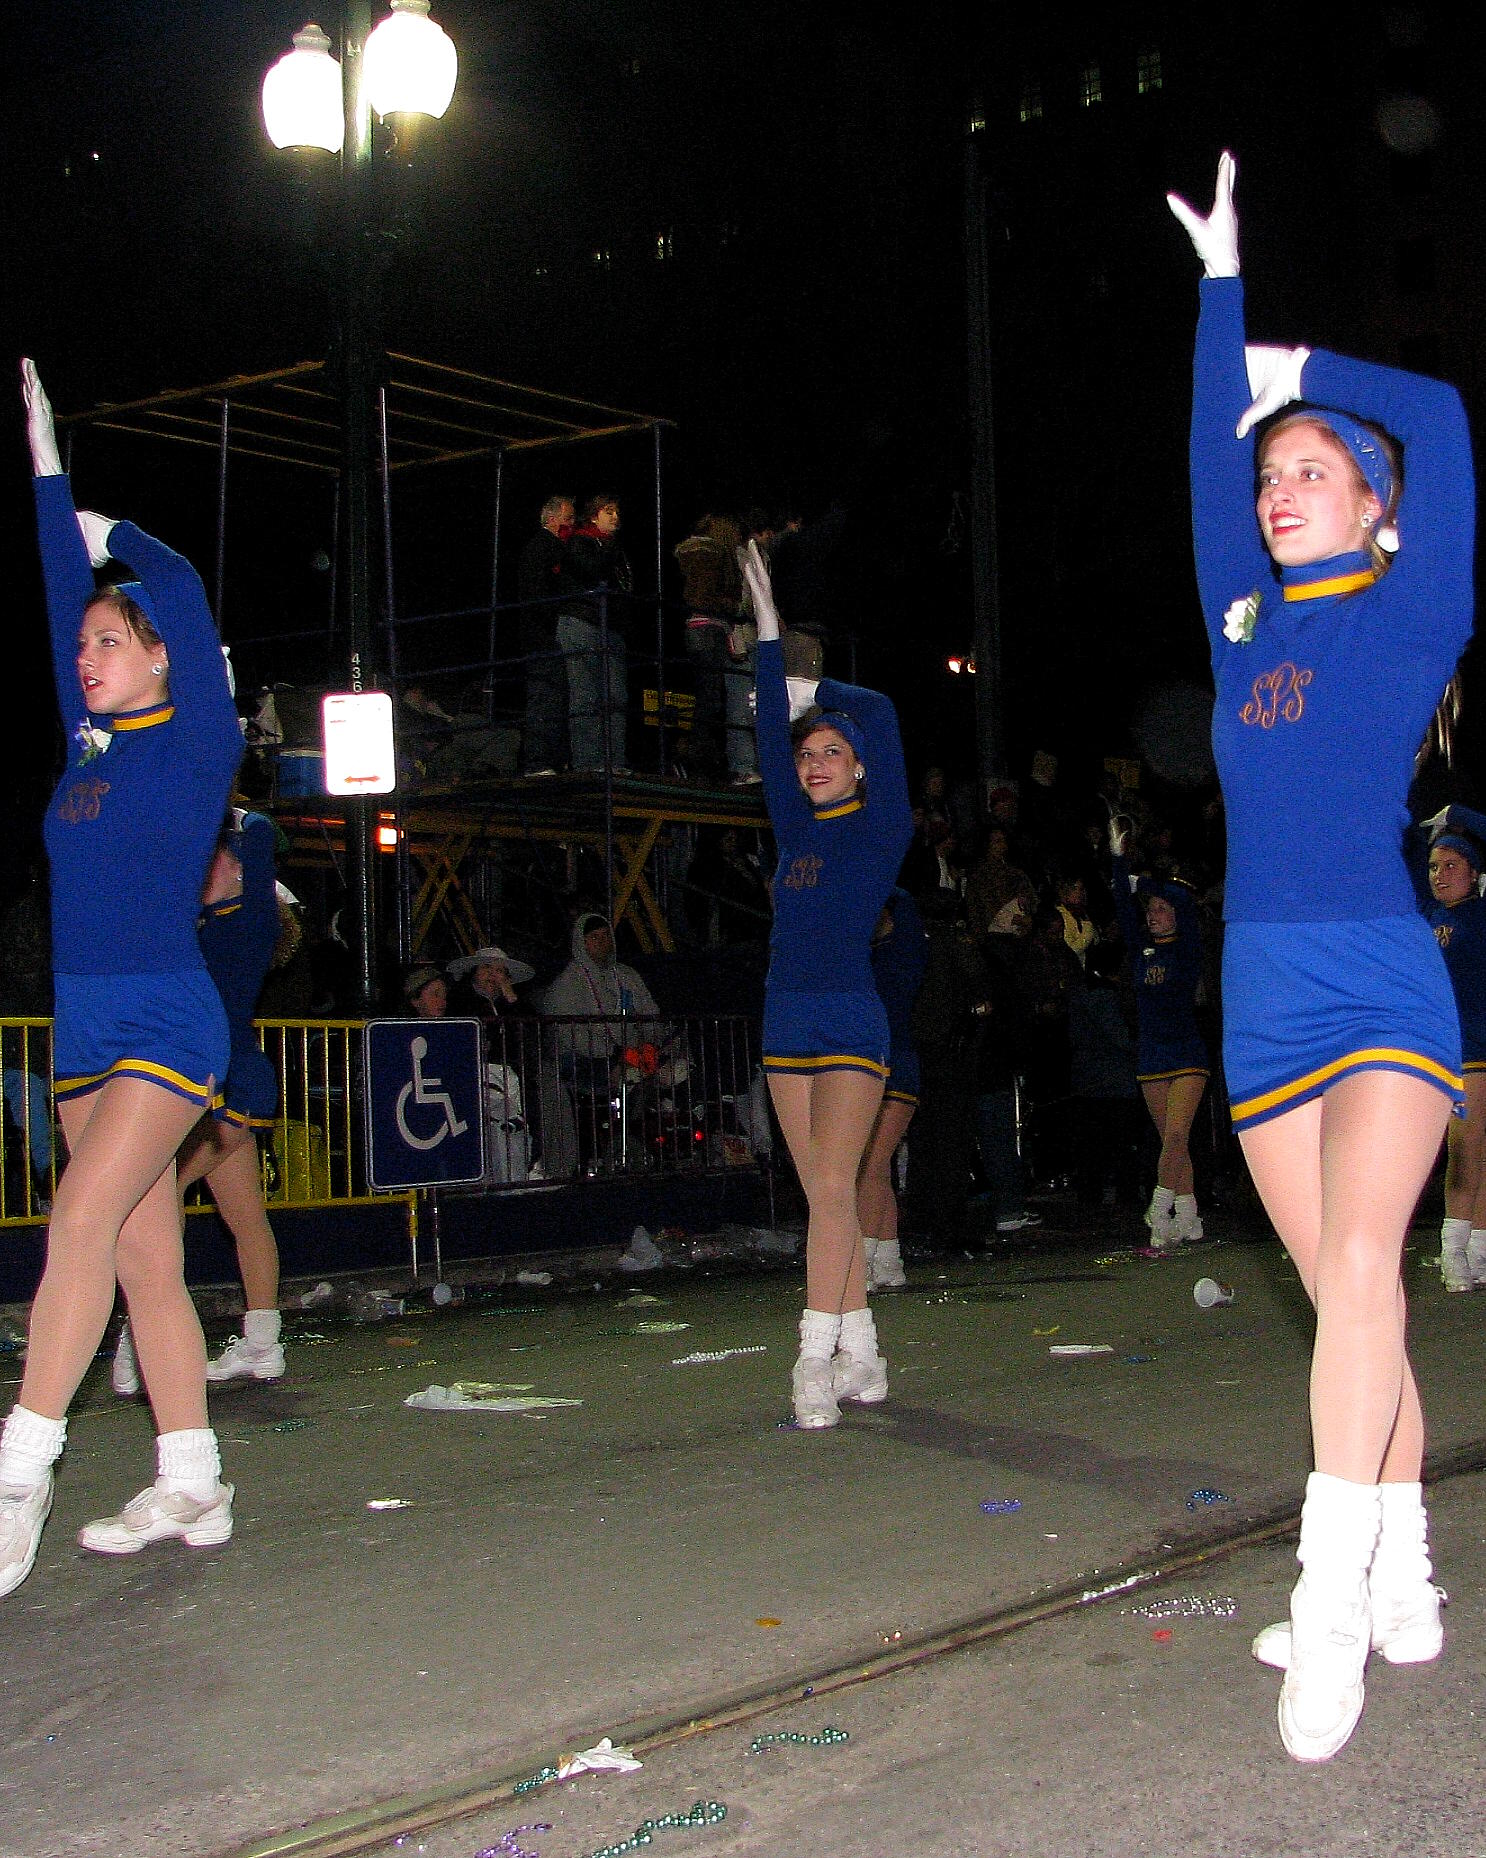 women performing in cheerleader outfits in front of a crowd